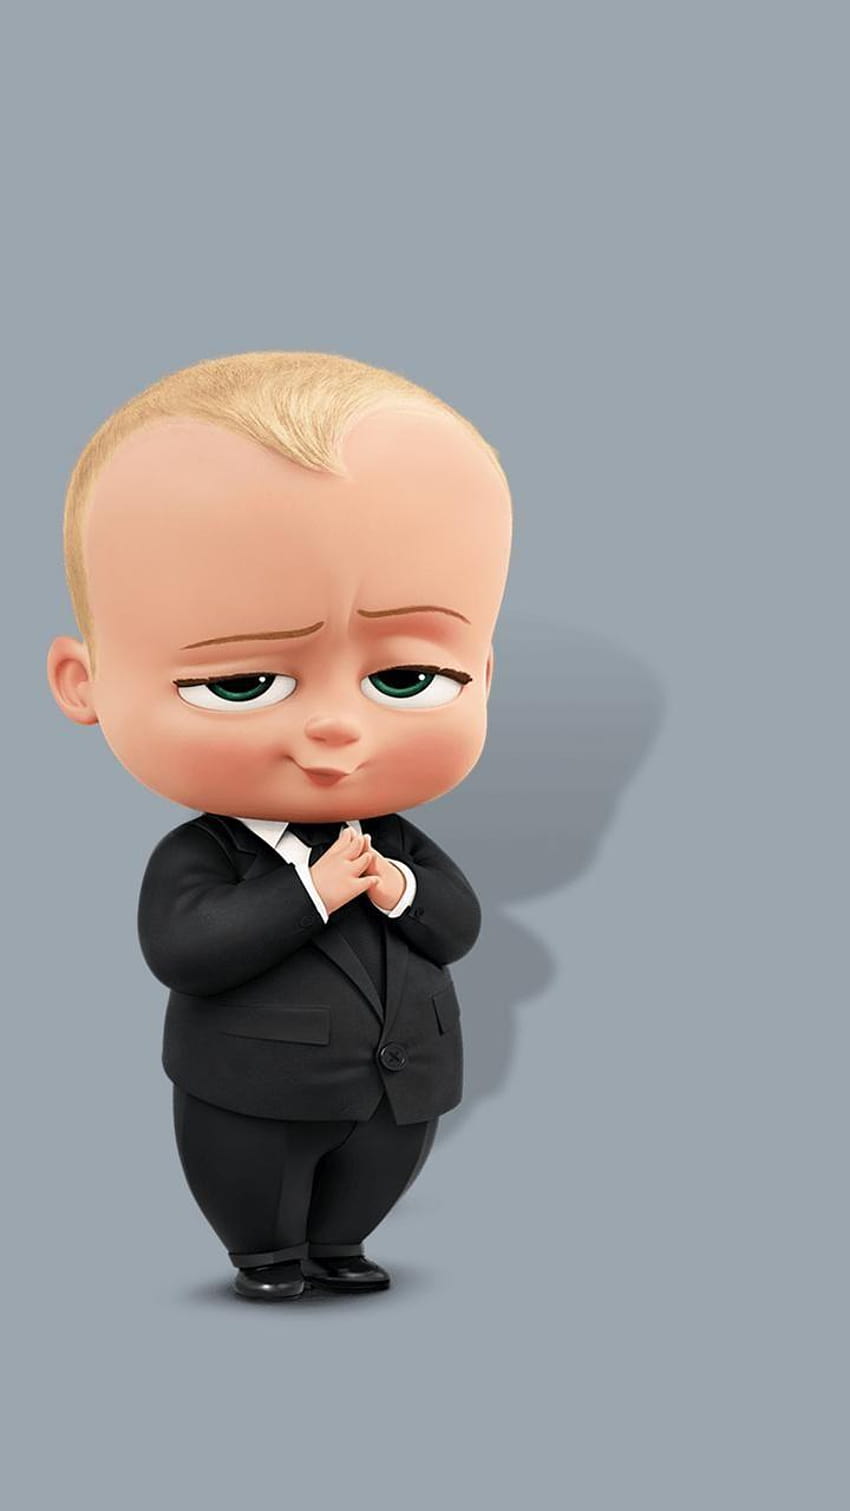 The Boss Baby in 2019, boss baby mobile HD phone wallpaper